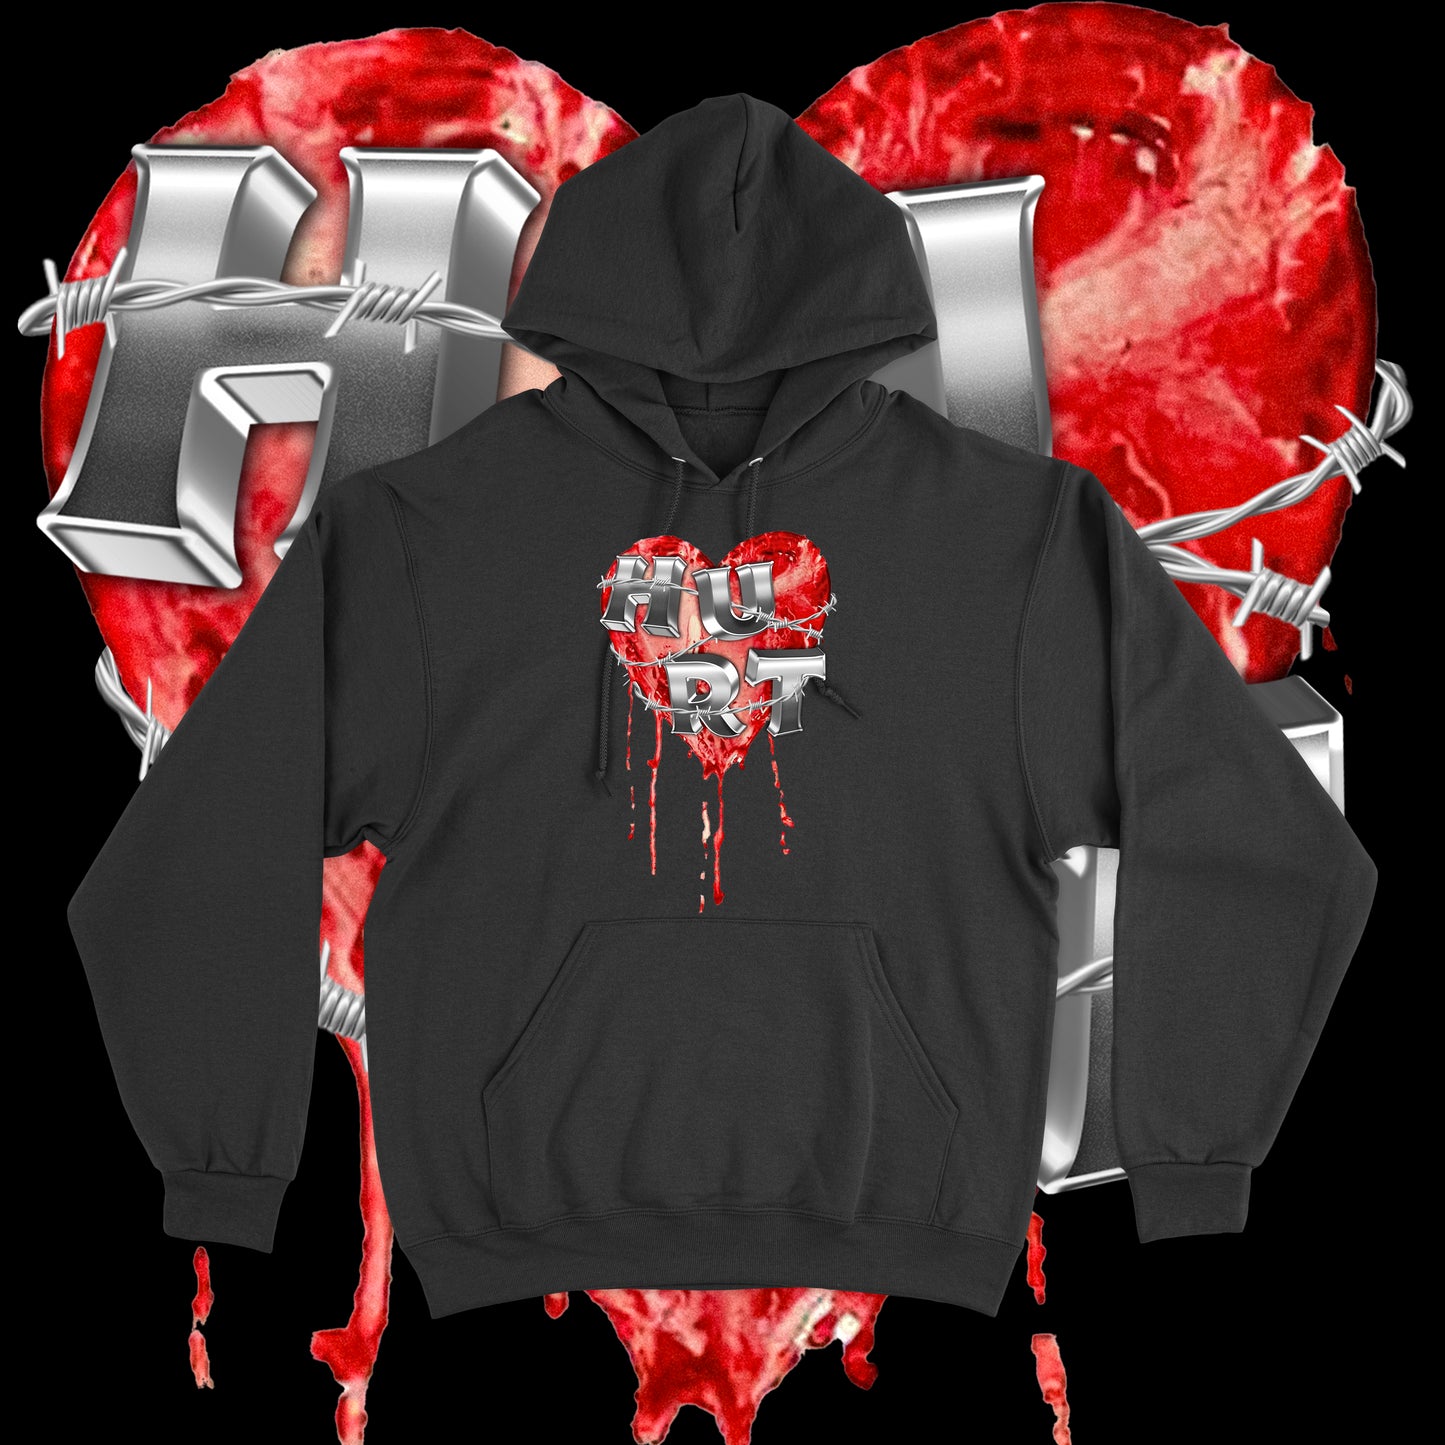 Wired Heart (Hoodie)